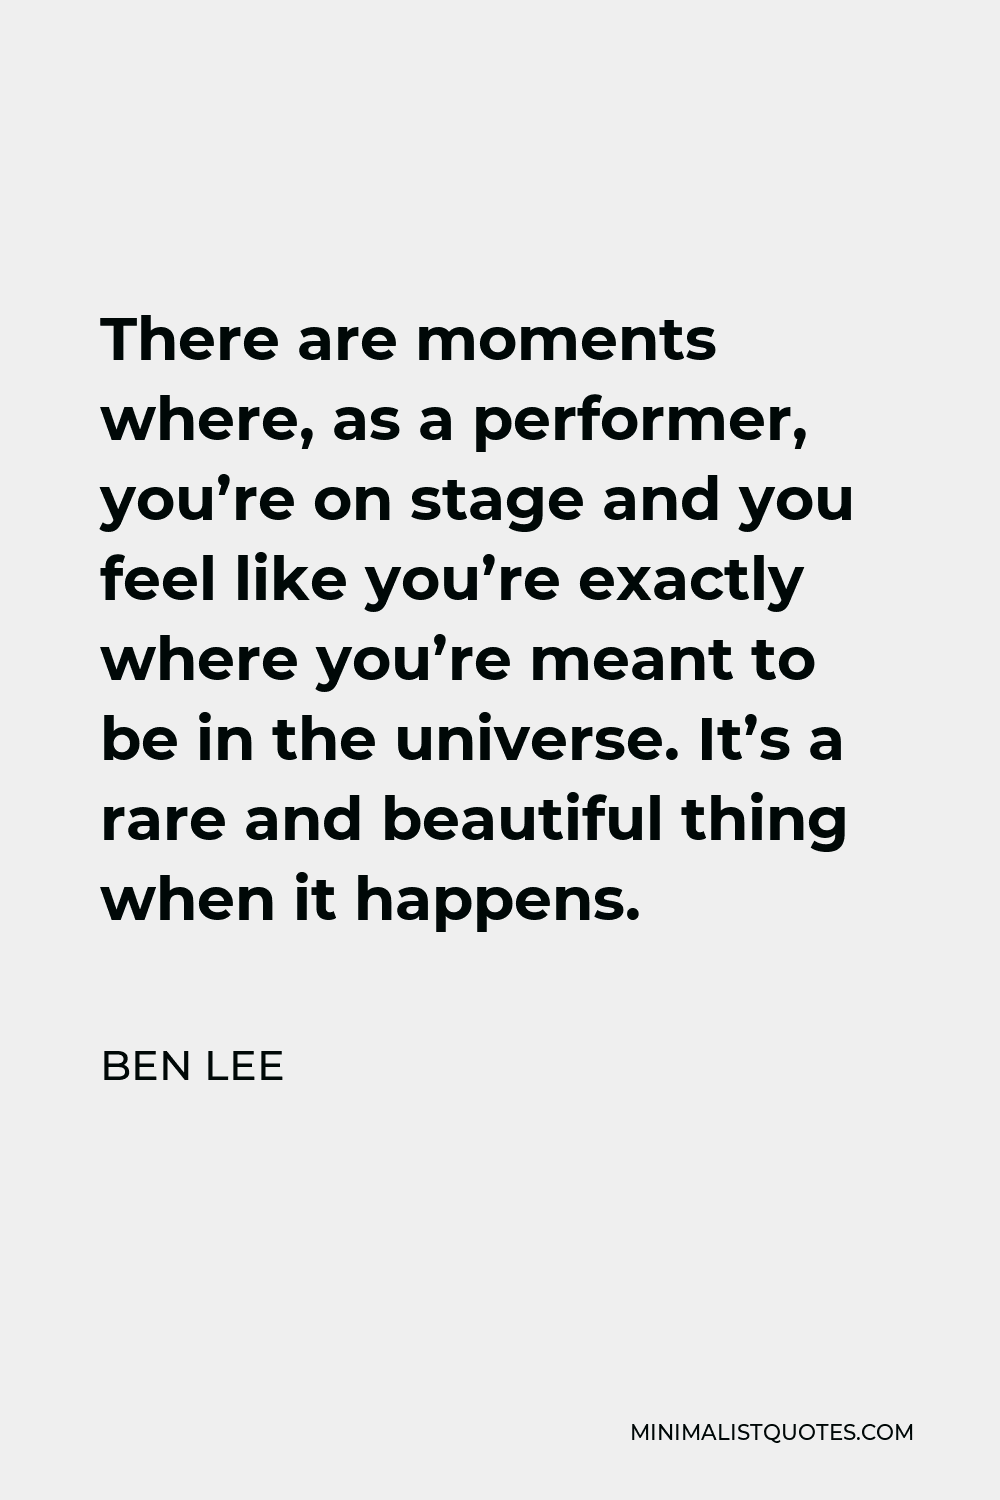 Ben Lee Quote - There are moments where, as a performer, you’re on stage and you feel like you’re exactly where you’re meant to be in the universe. It’s a rare and beautiful thing when it happens.